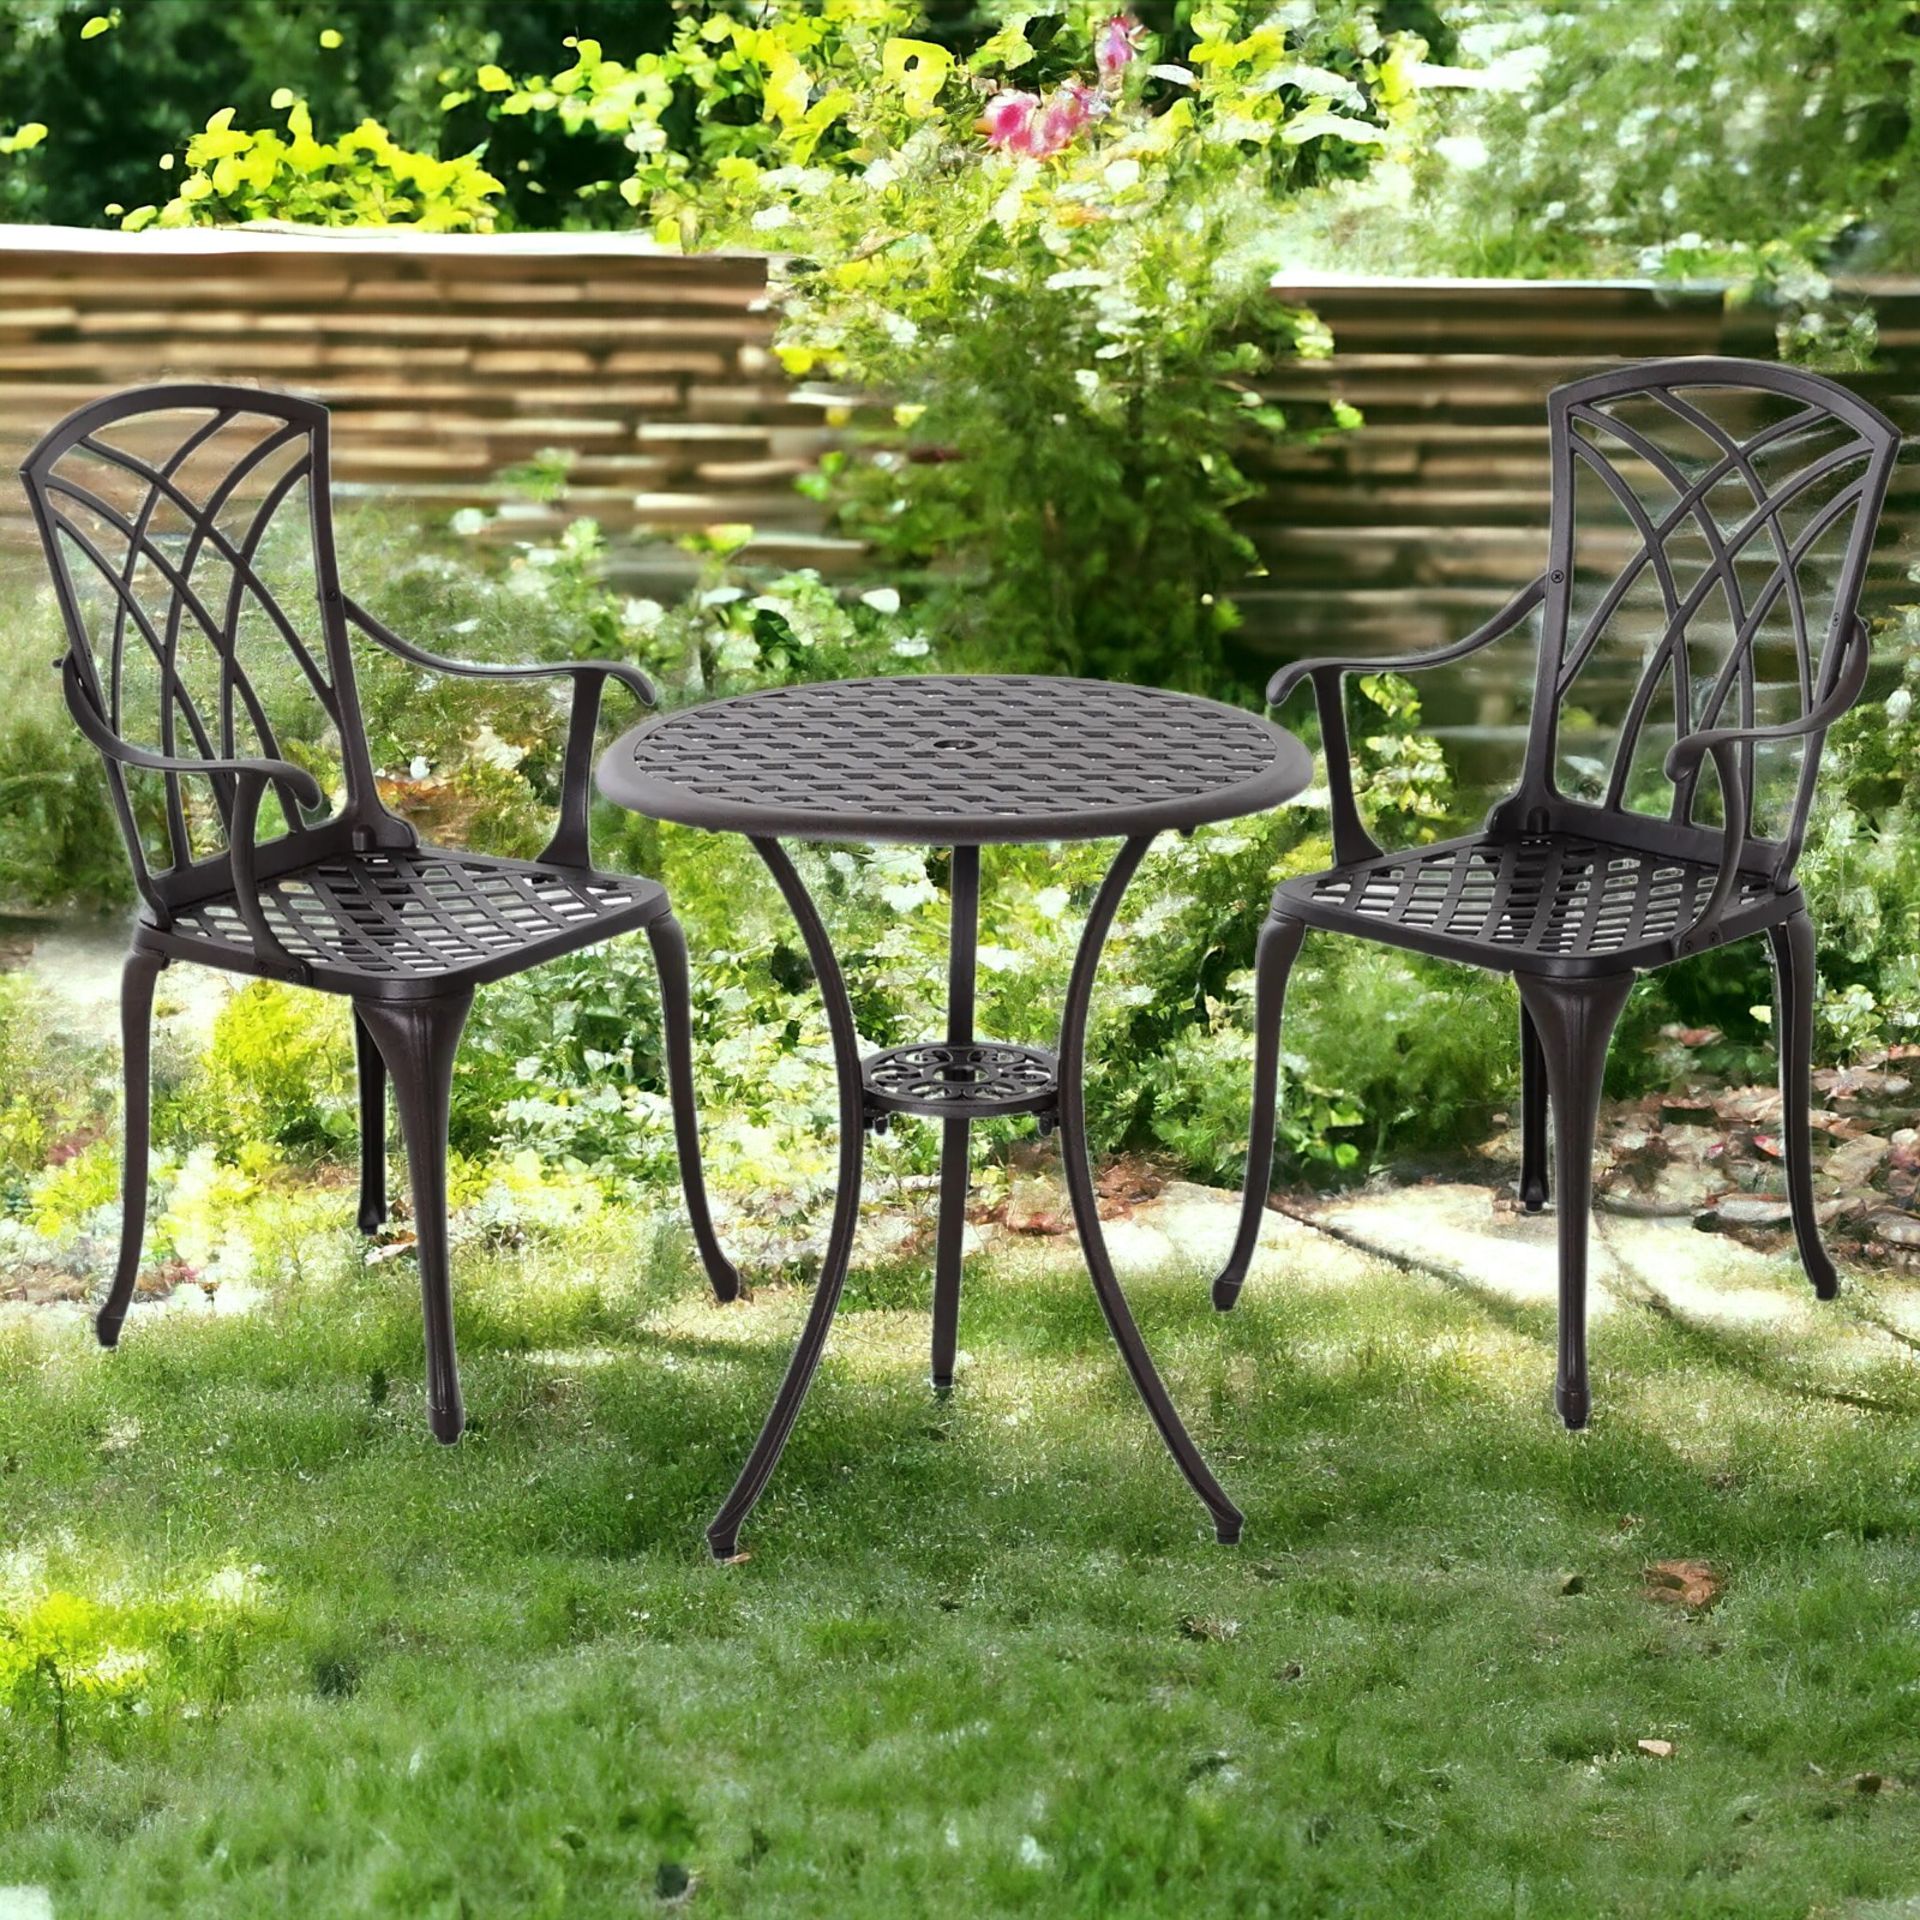 FREE DELIVERY -BRAND NEW 3 PCS COFFEE TABLE CHAIRS OUTDOOR GARDEN FURNITURE SET - Image 2 of 2